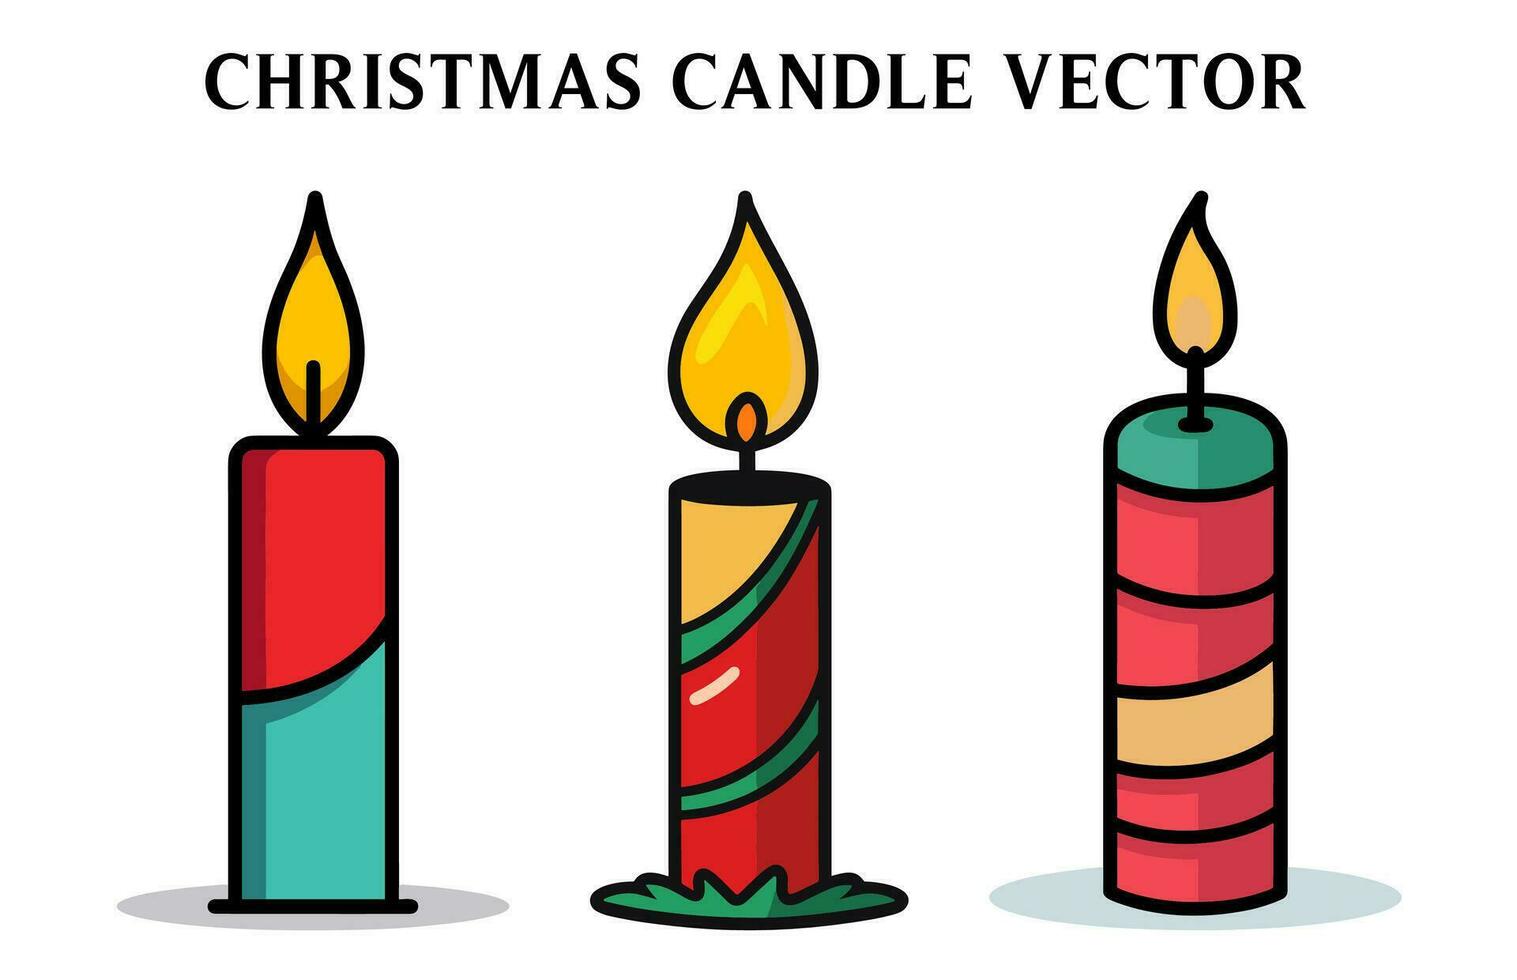 Christmas Candle Vector illustration Free